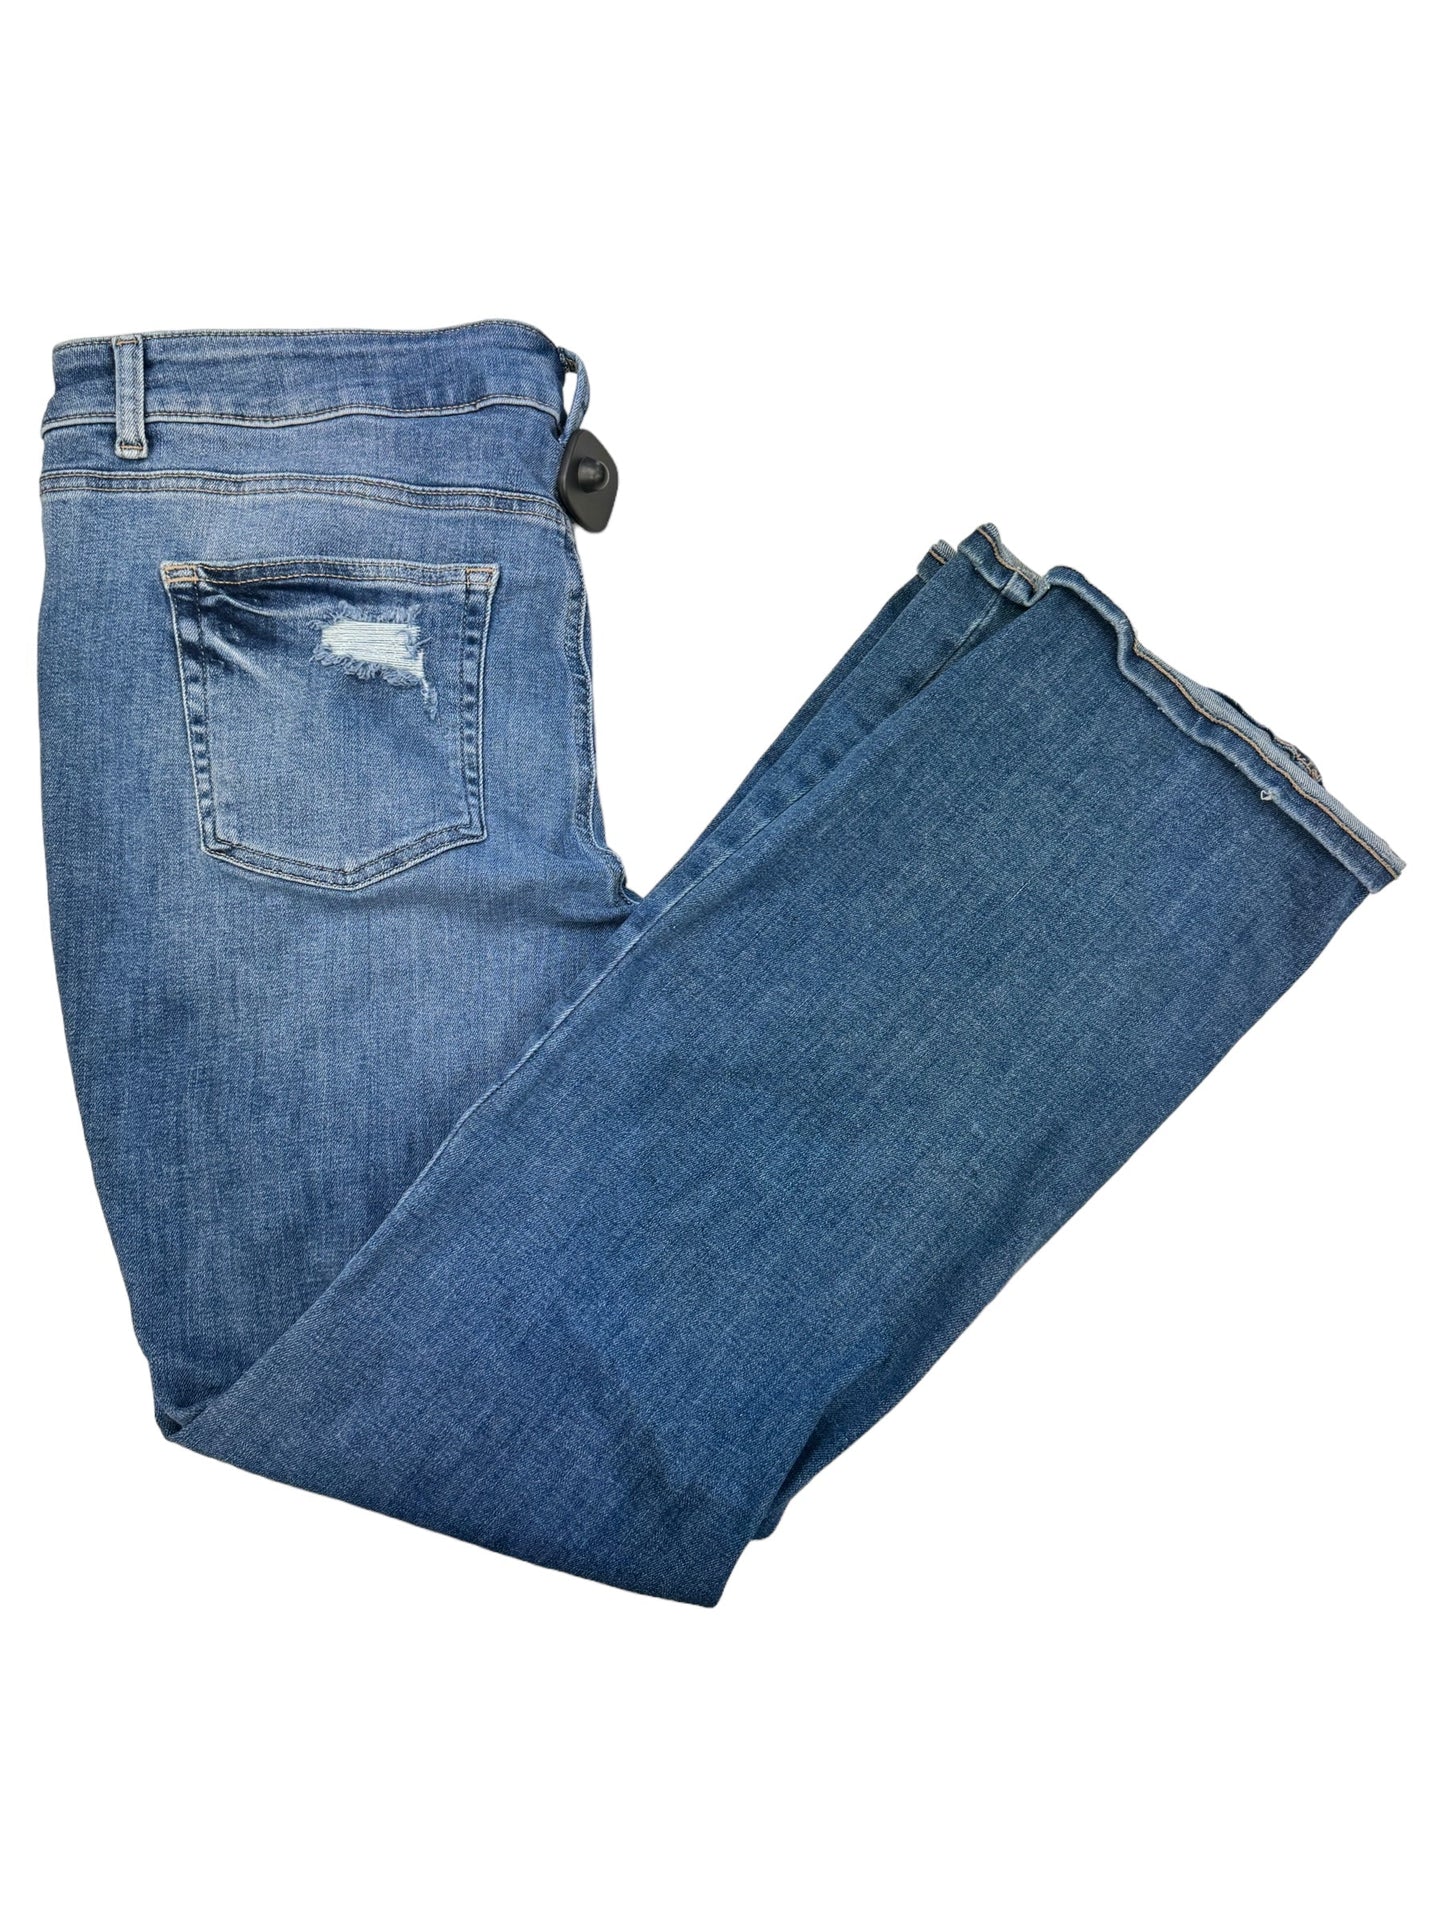 Jeans Flared By Clothes Mentor  Size: 20w